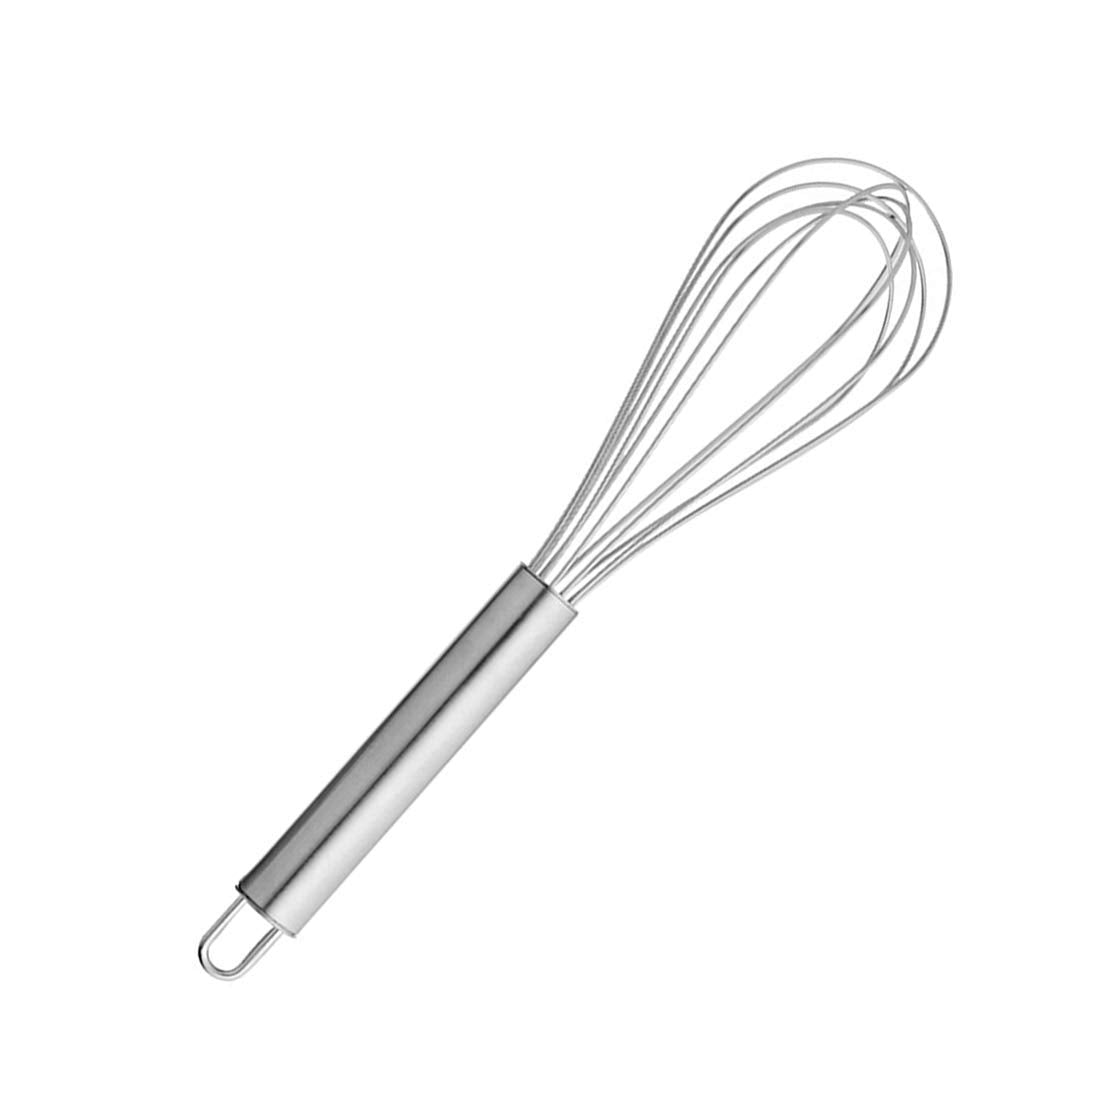 Rudra Exports Stainless Steel Egg Whisk Hand Blender Mixer Latte Maker for Milk Coffee Egg Beater Juice Set of 3 (8 inch,10 inch,12 inch)